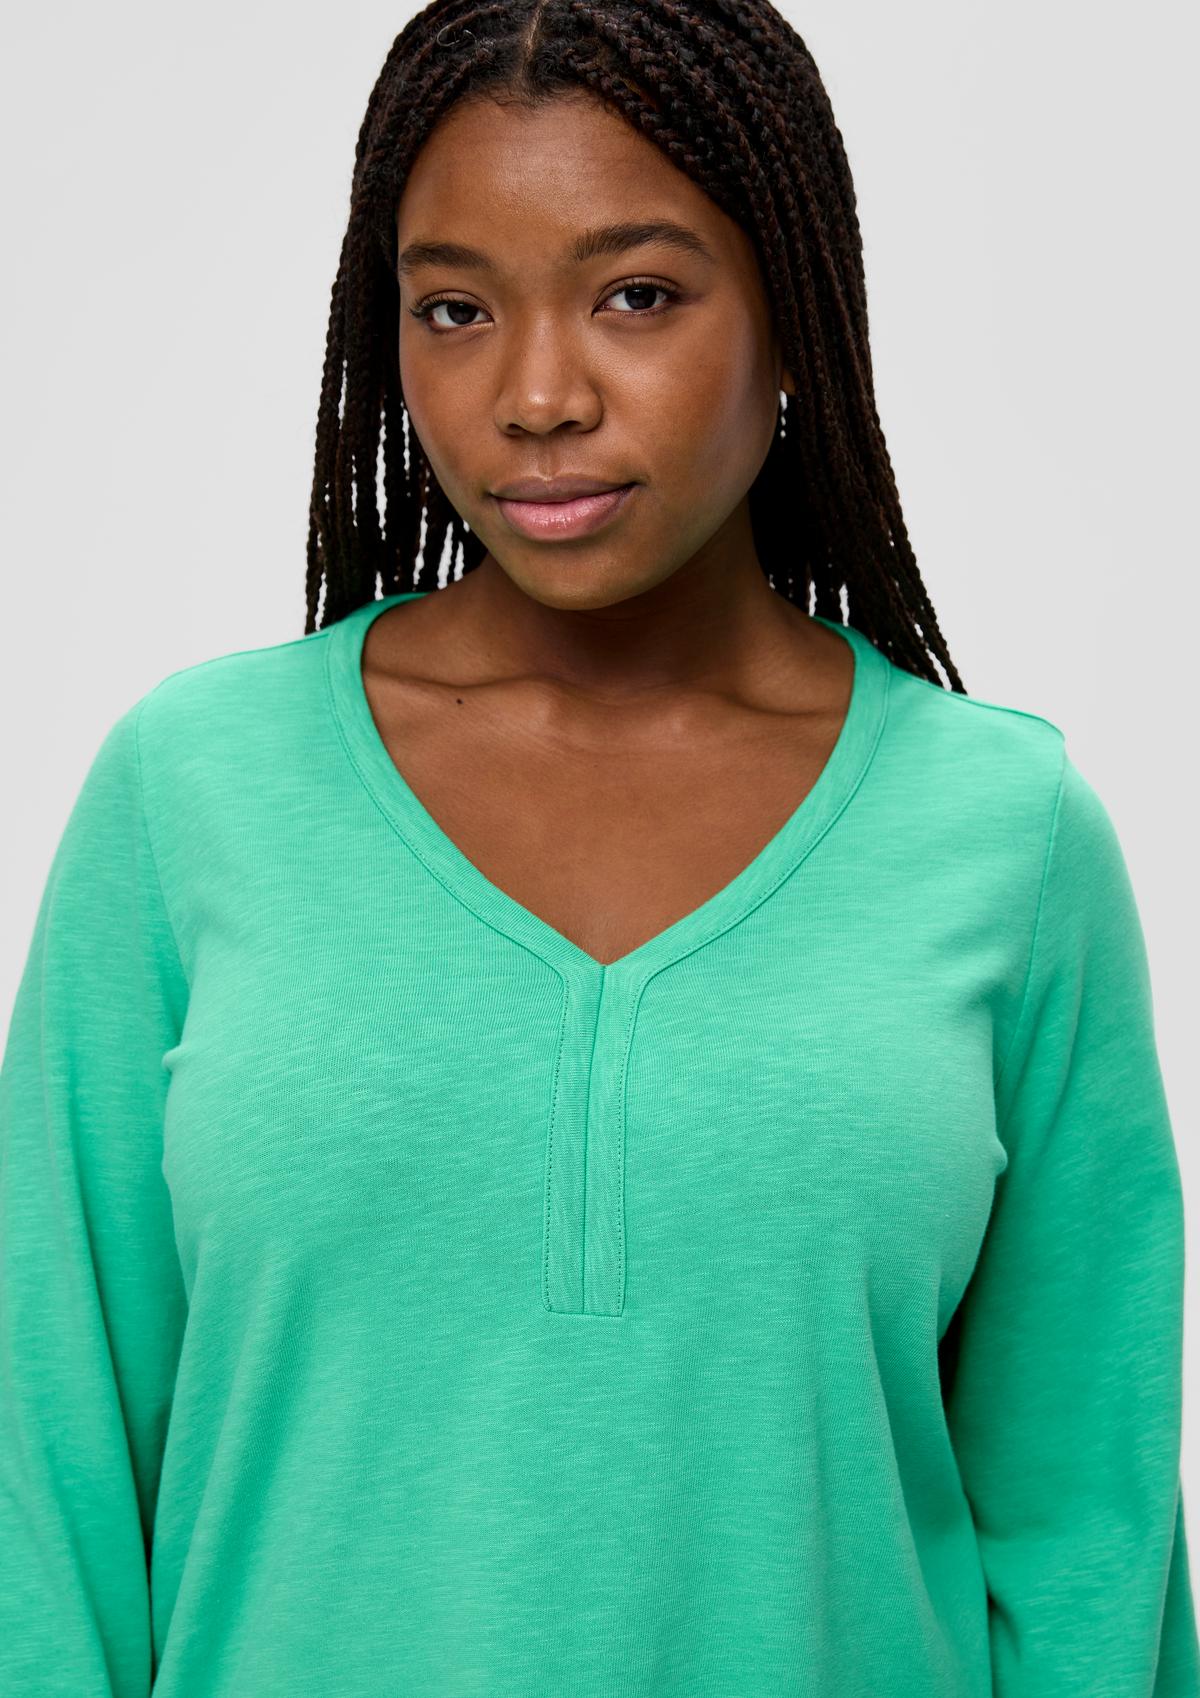 s.Oliver Long sleeve top with a slub yarn texture